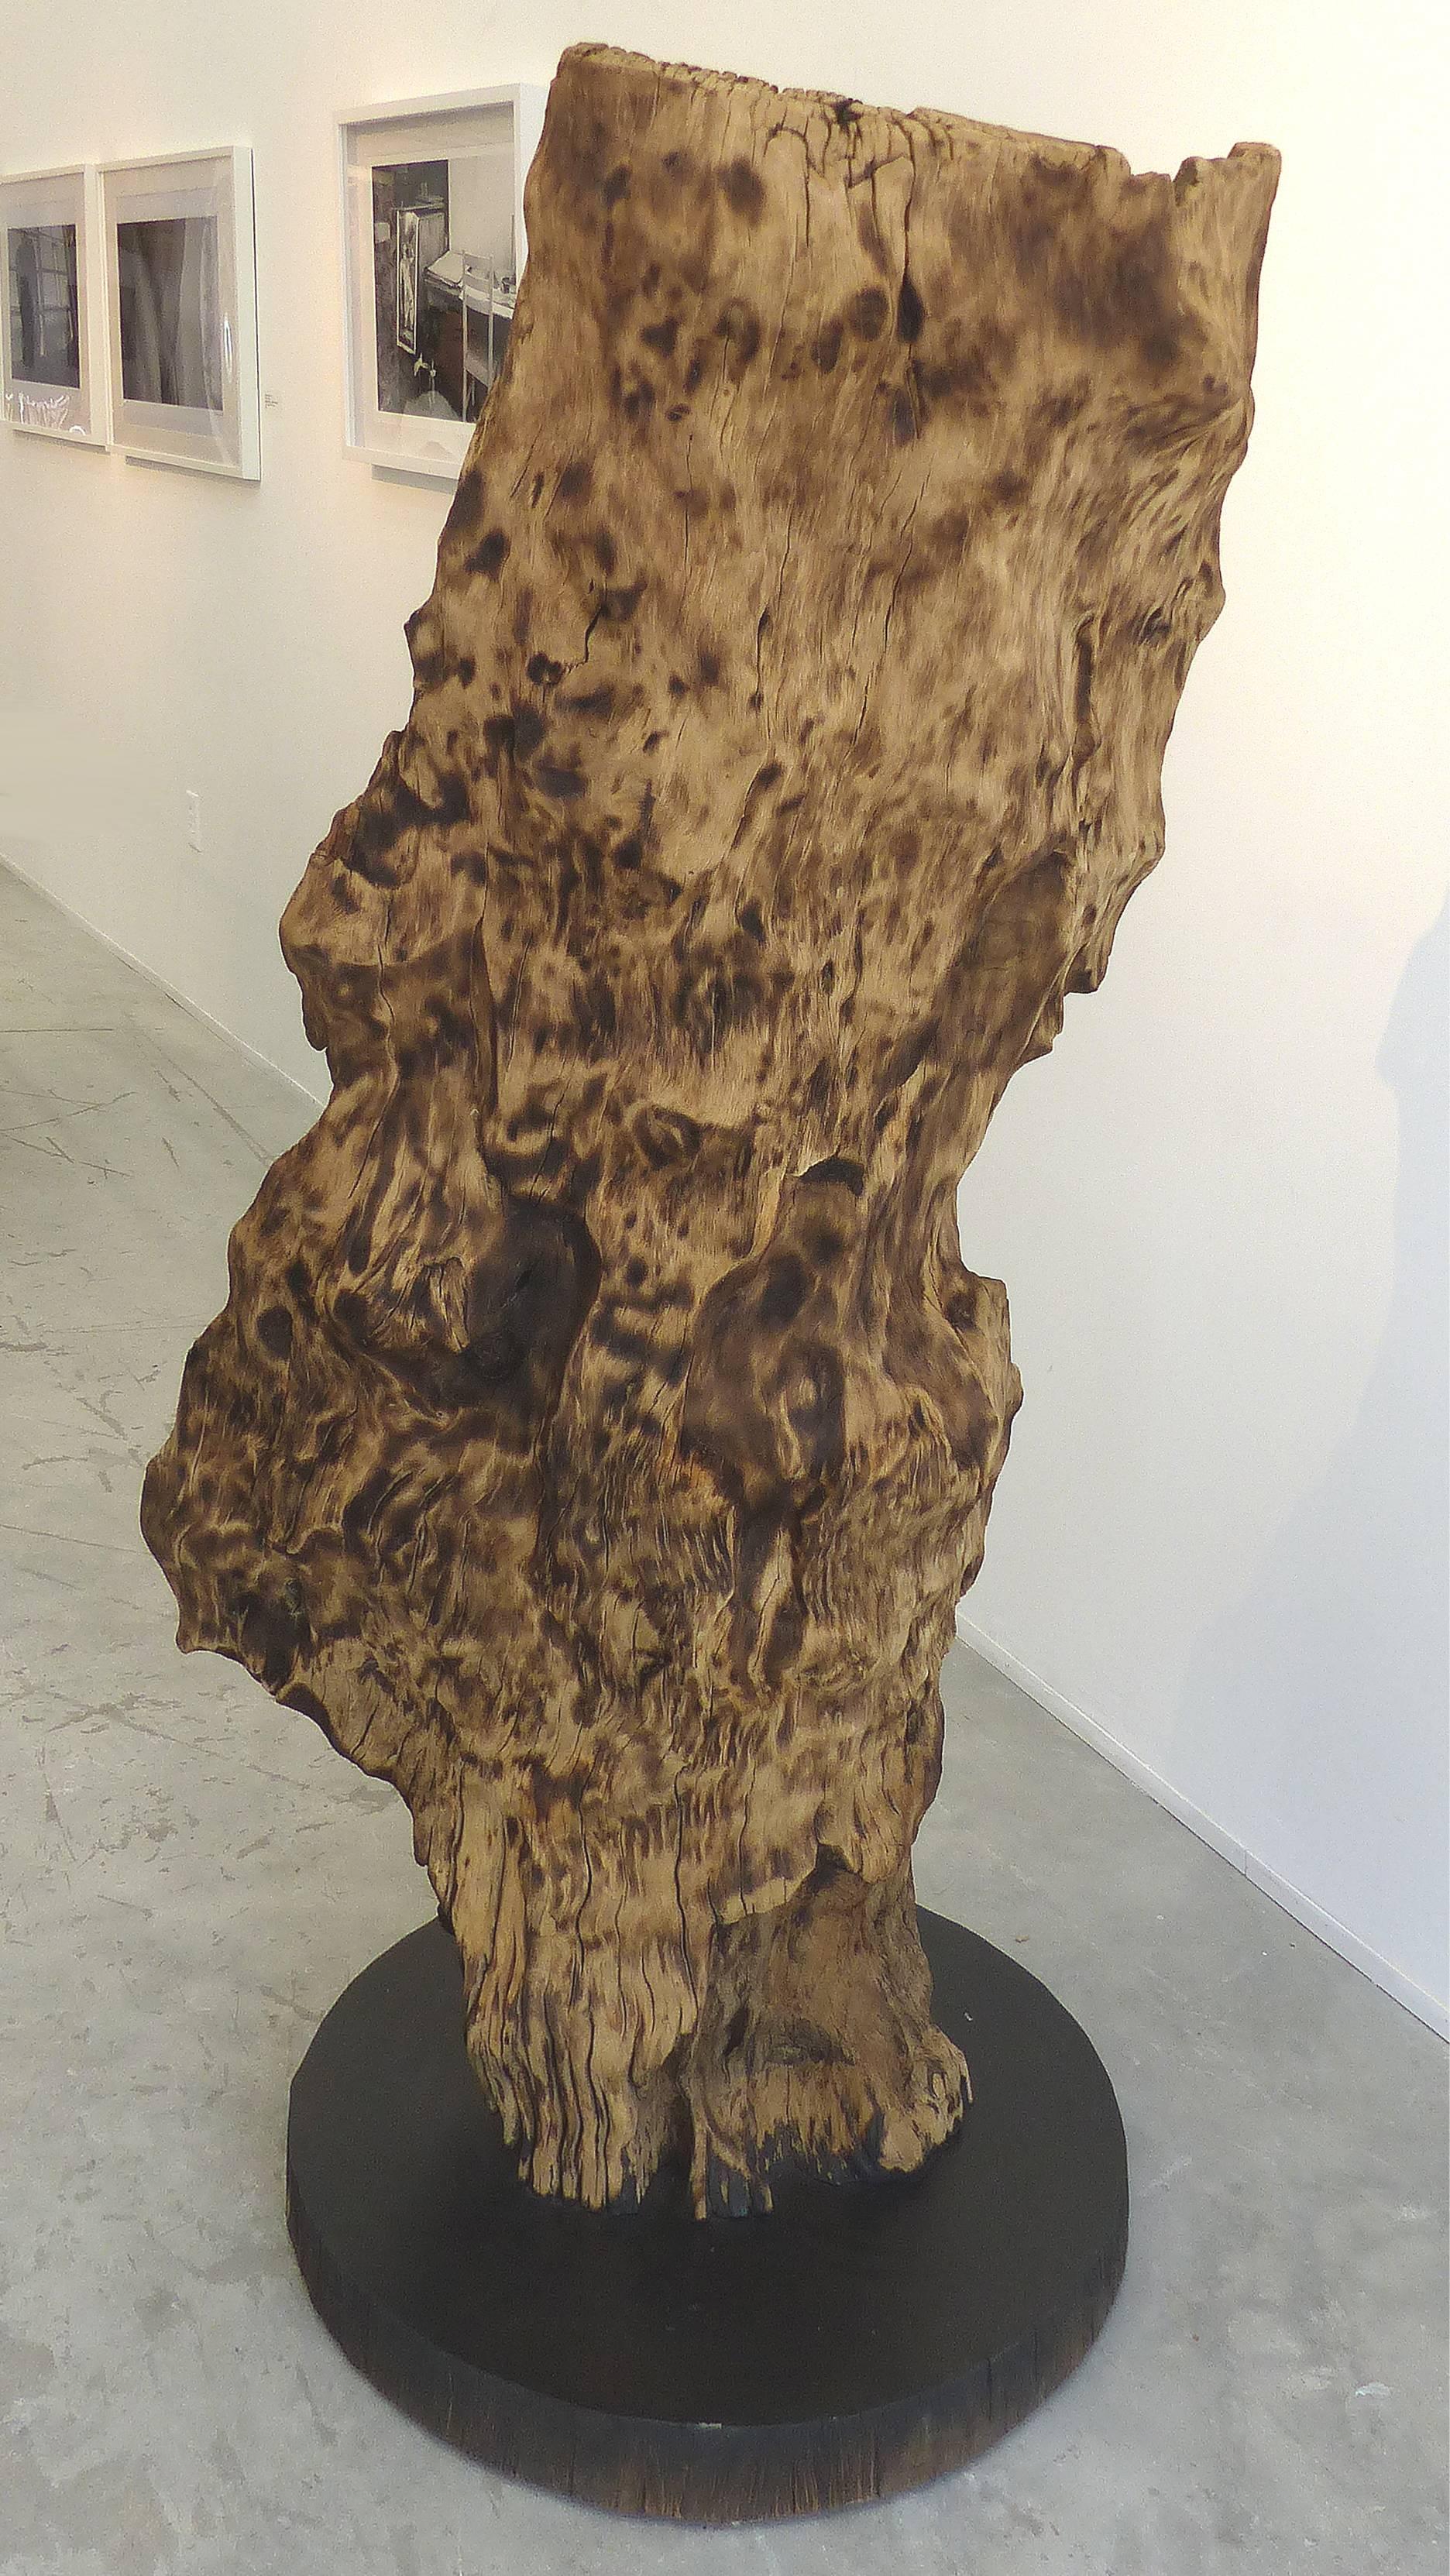 Monumental Reclaimed Wood Sculpture from the Brazilian Amazon by Valeria Totti 3